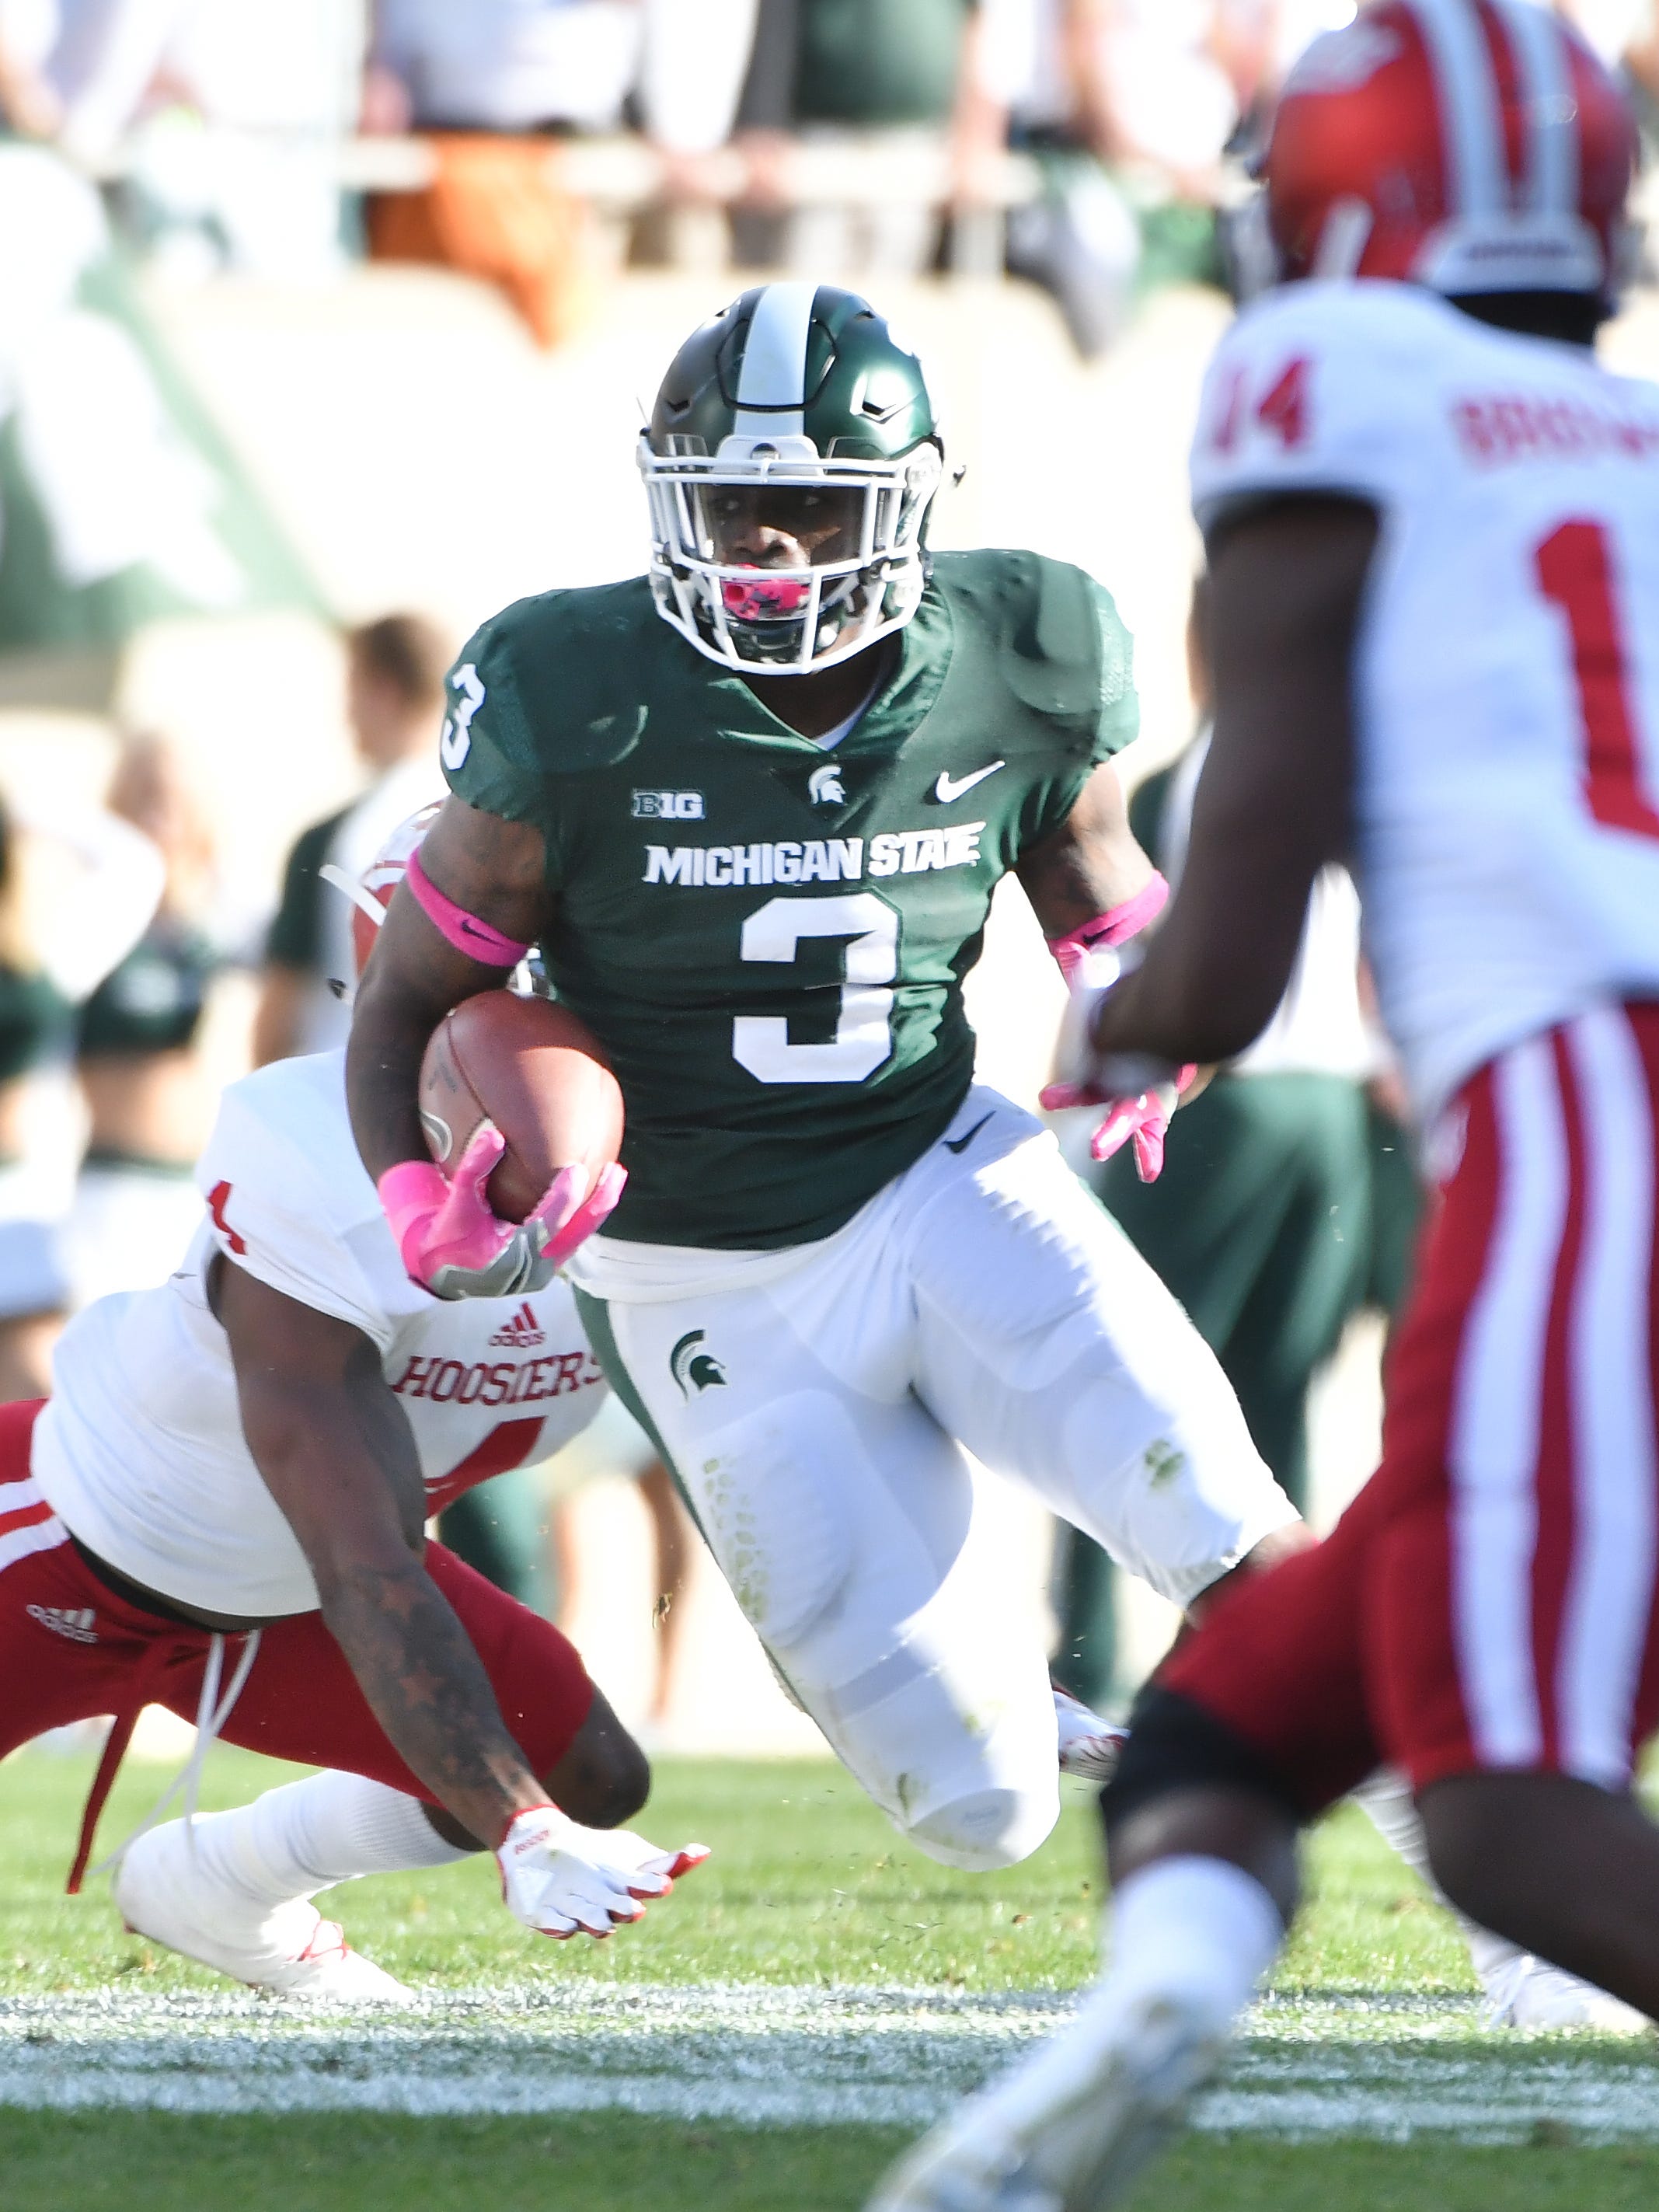 Running back – LJ Scott, Sr. This is another simple choice, as Scott decided the NFL could wait for another year and came back for his final season with the Spartans. He'll get the bulk of the work this season, though sophomore Connor Heyward likely will see time spelling Scott along with filling plenty of other roles as one of MSU's most versatile players. Weston Bridges, who missed spring recovering from an injury, will be worth watching in the fall, as will incoming freshmen Elijah Collins and La’Darius Jefferson, both of whom will get a shot to see the field in their first season.